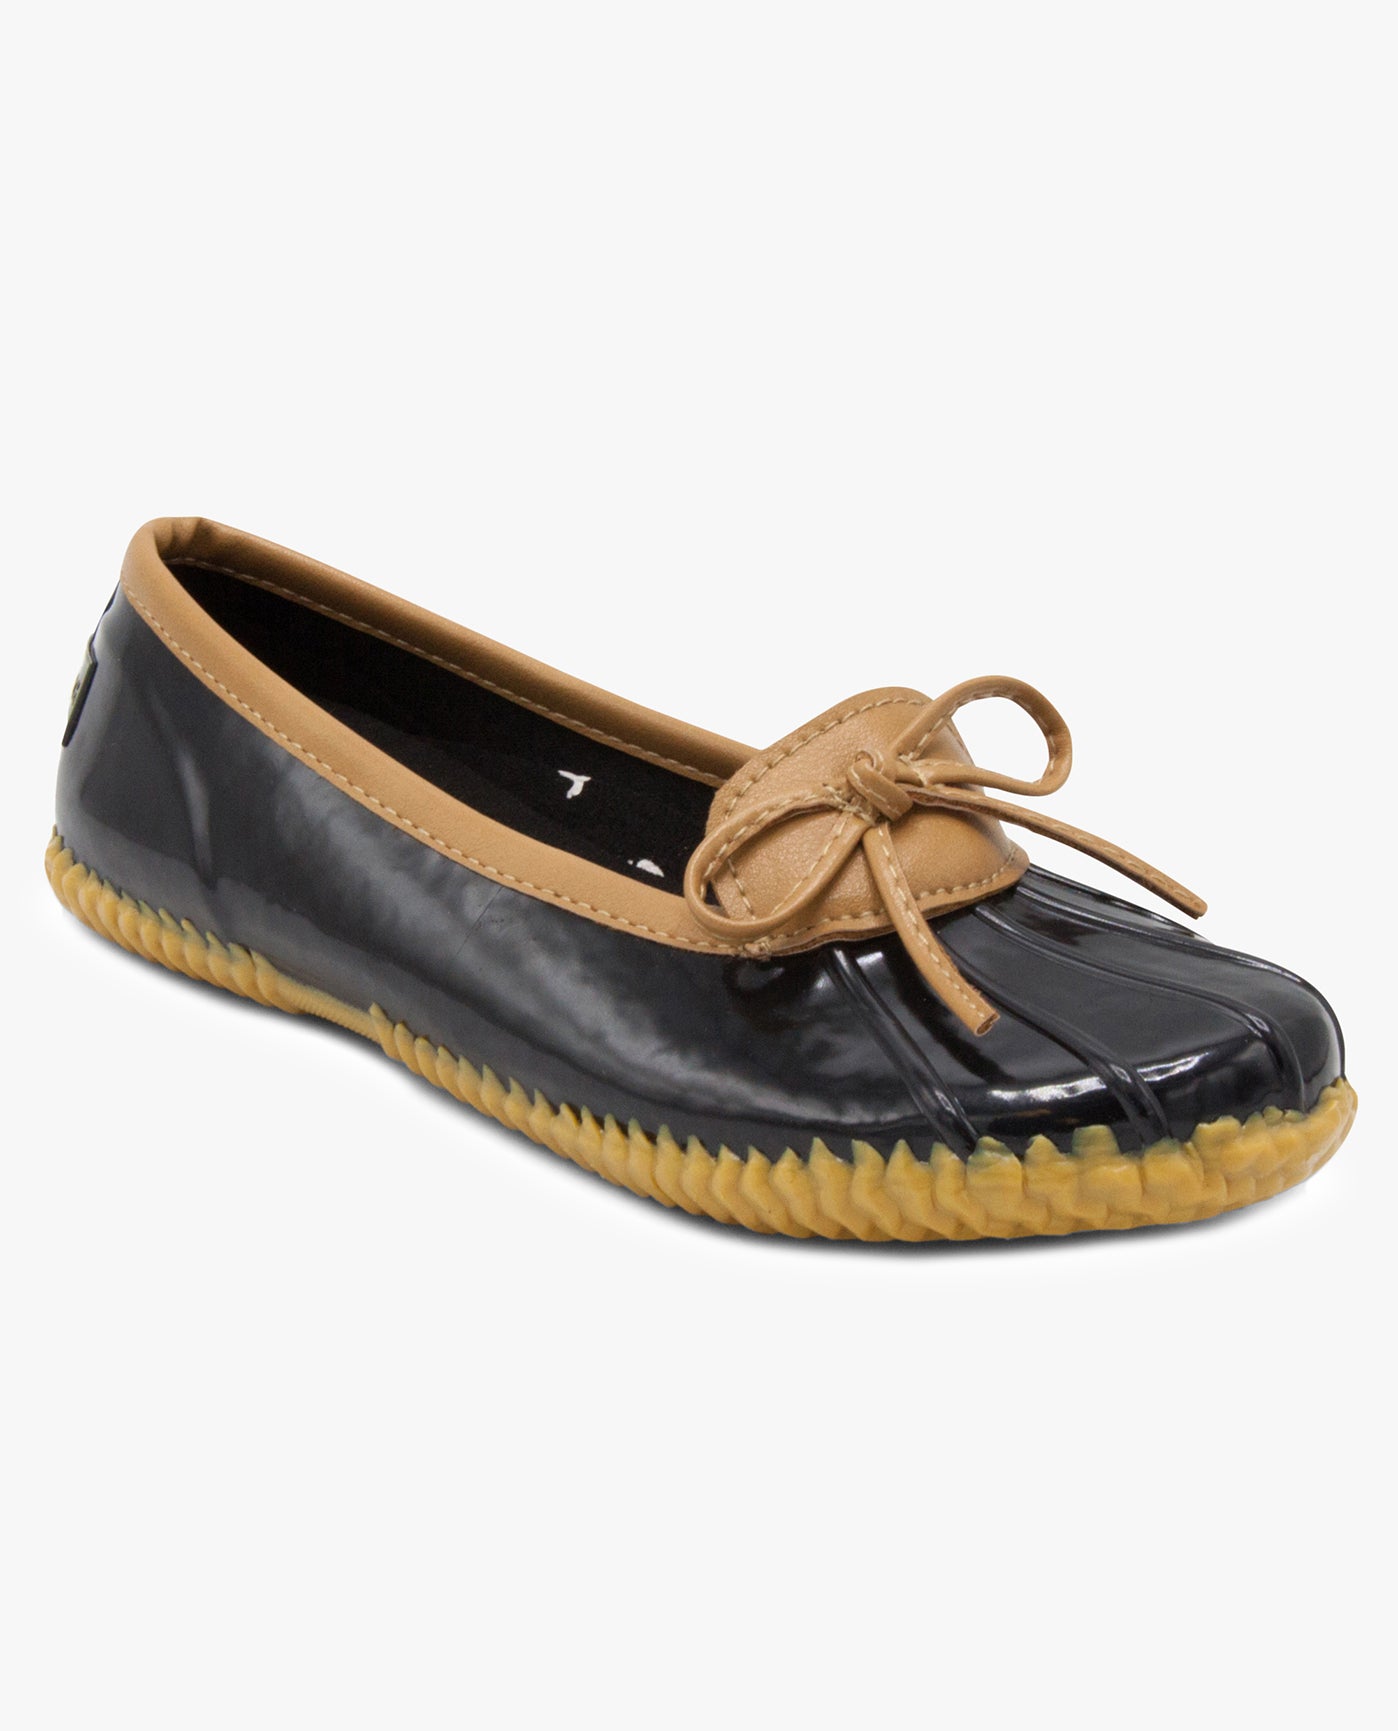 MAIN IMAGE OF WOMENS WEBSTER DUCK SHOE | ESO_BLACK_100